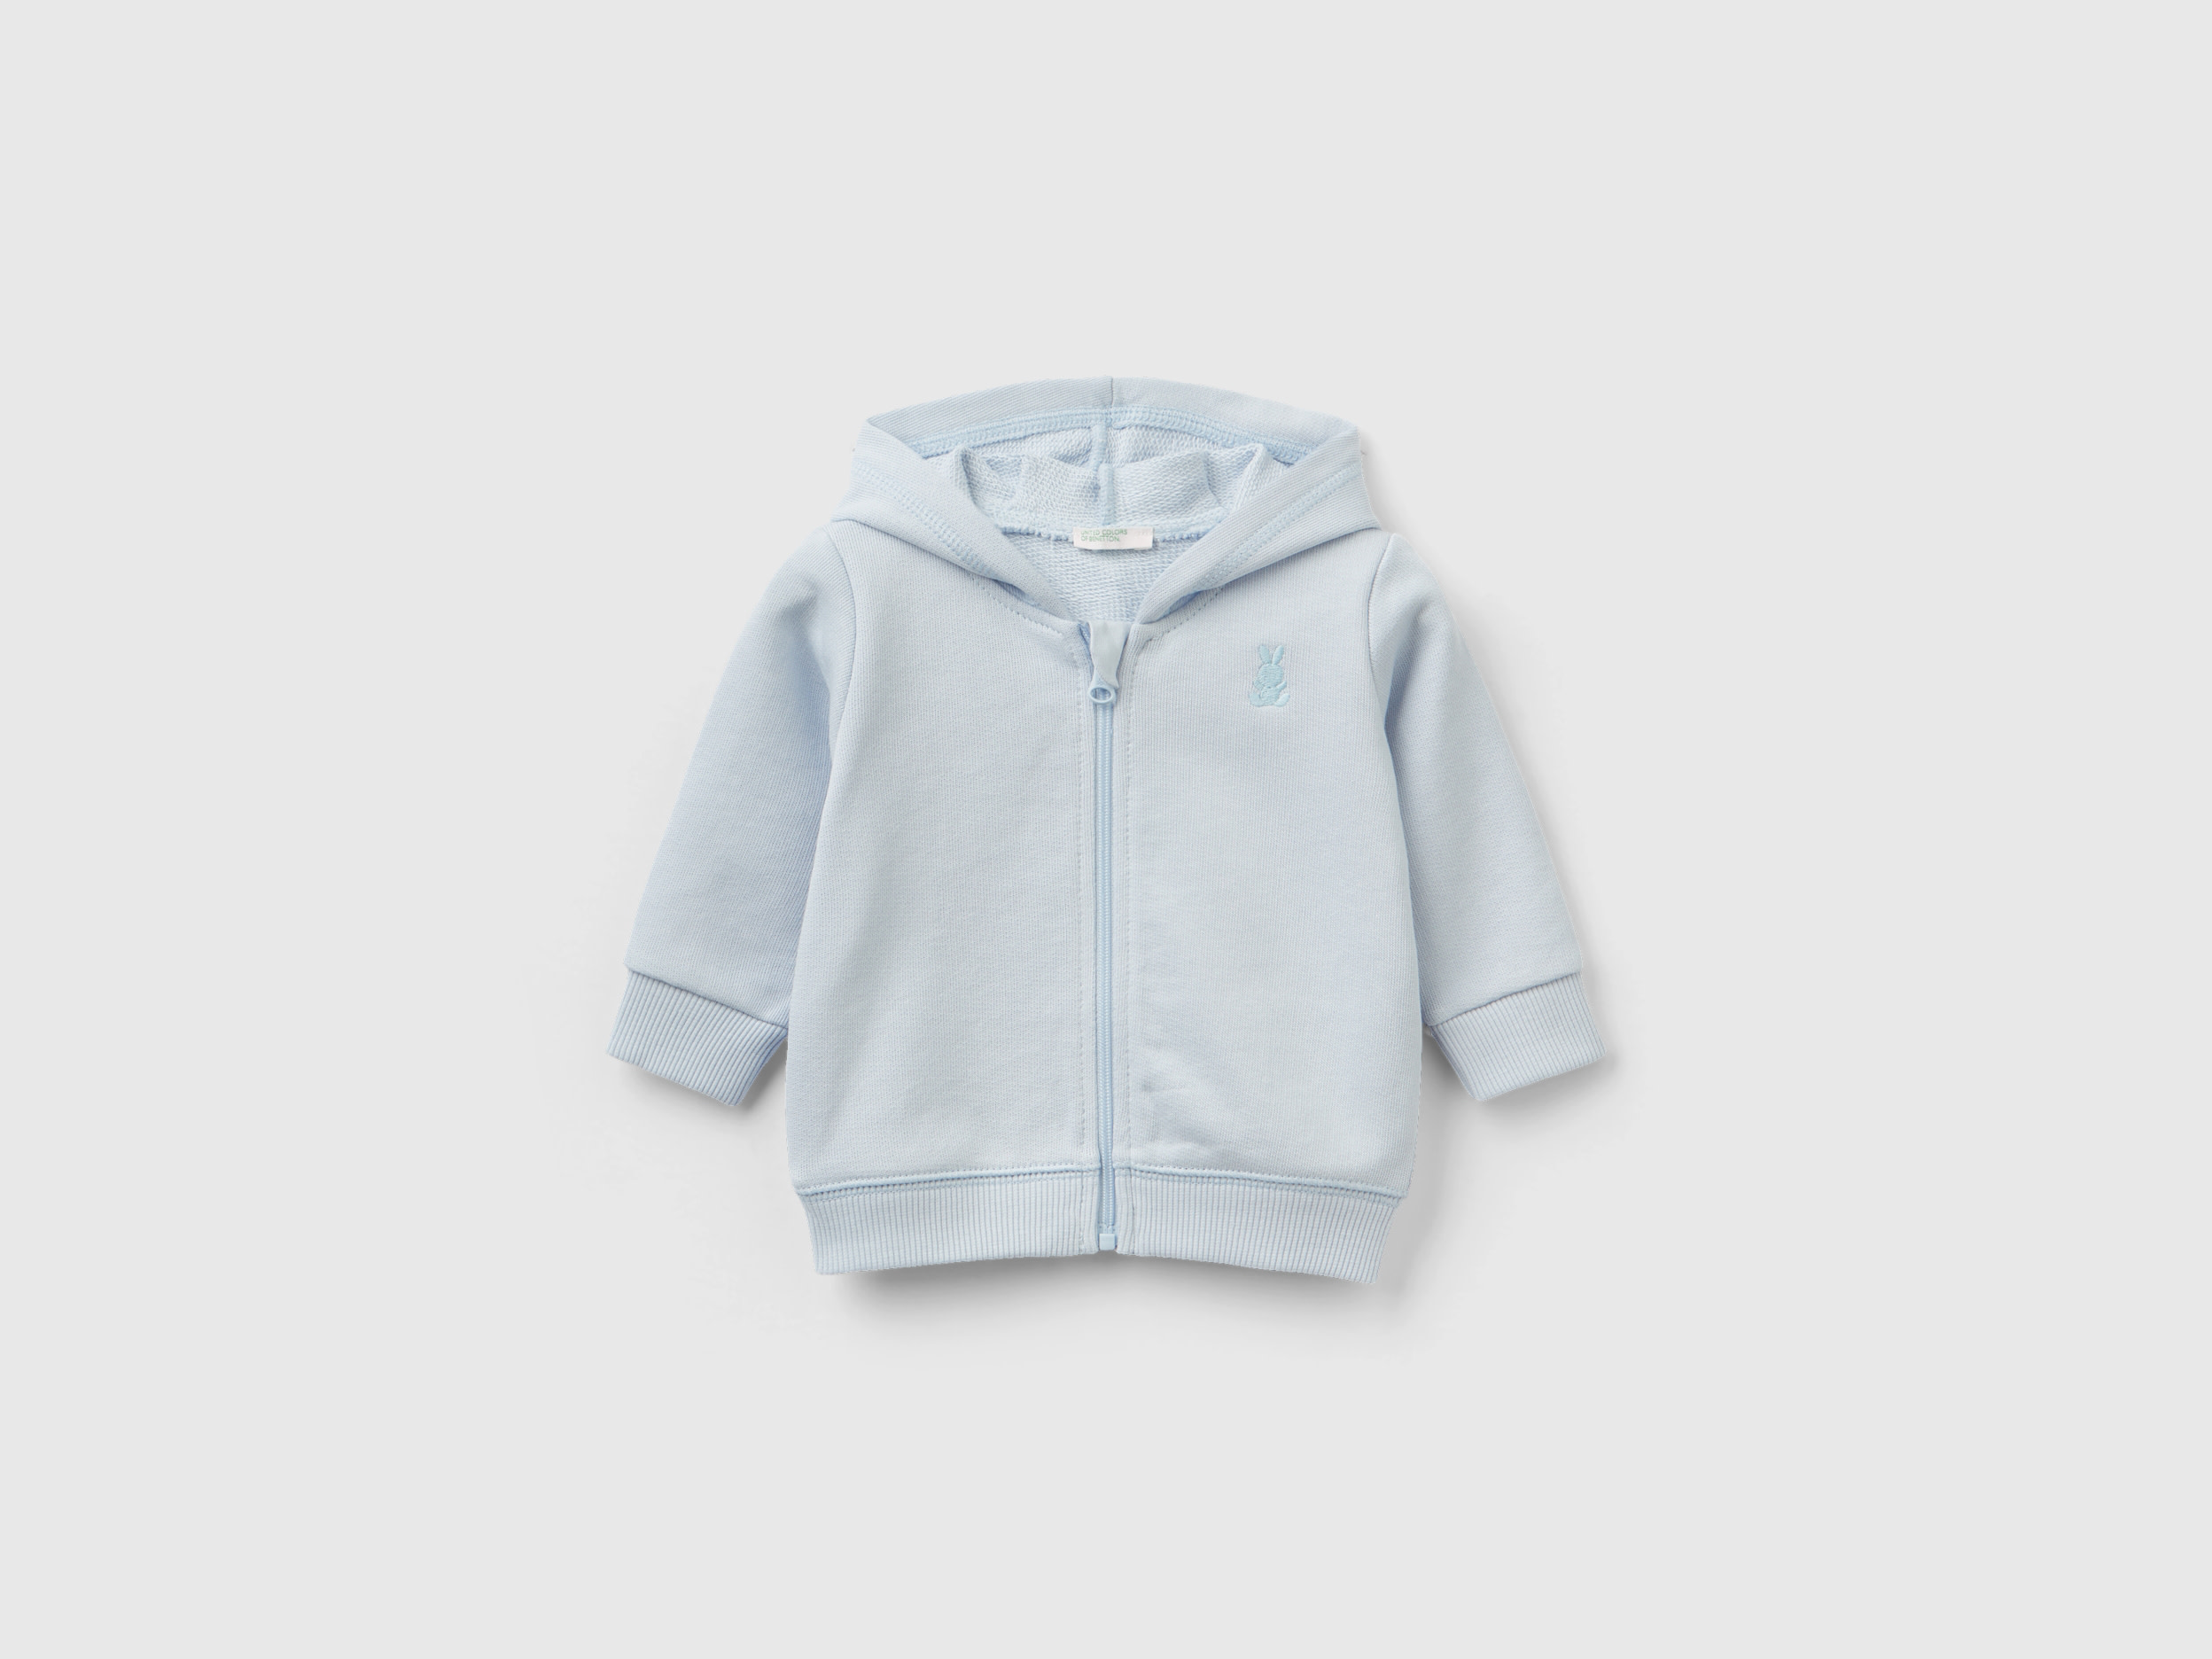 Image of Benetton, Hoodie In Organic Cotton, size 50, Sky Blue, Kids